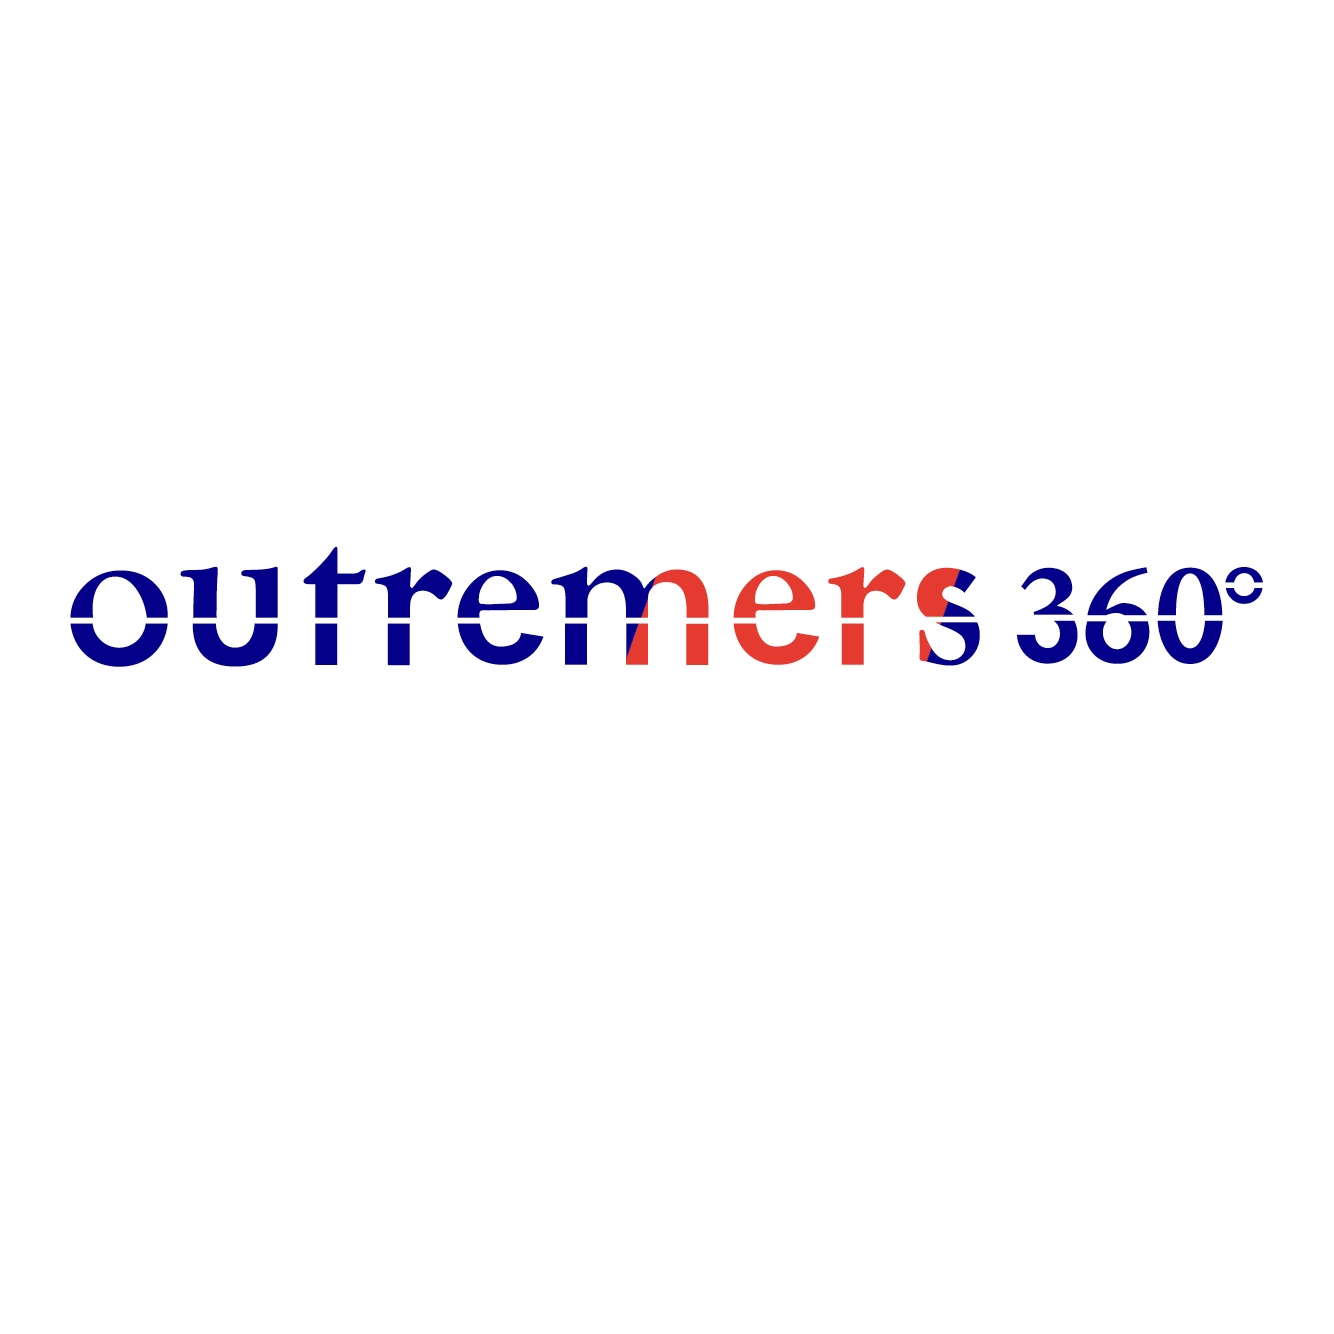 OUTREMERS360